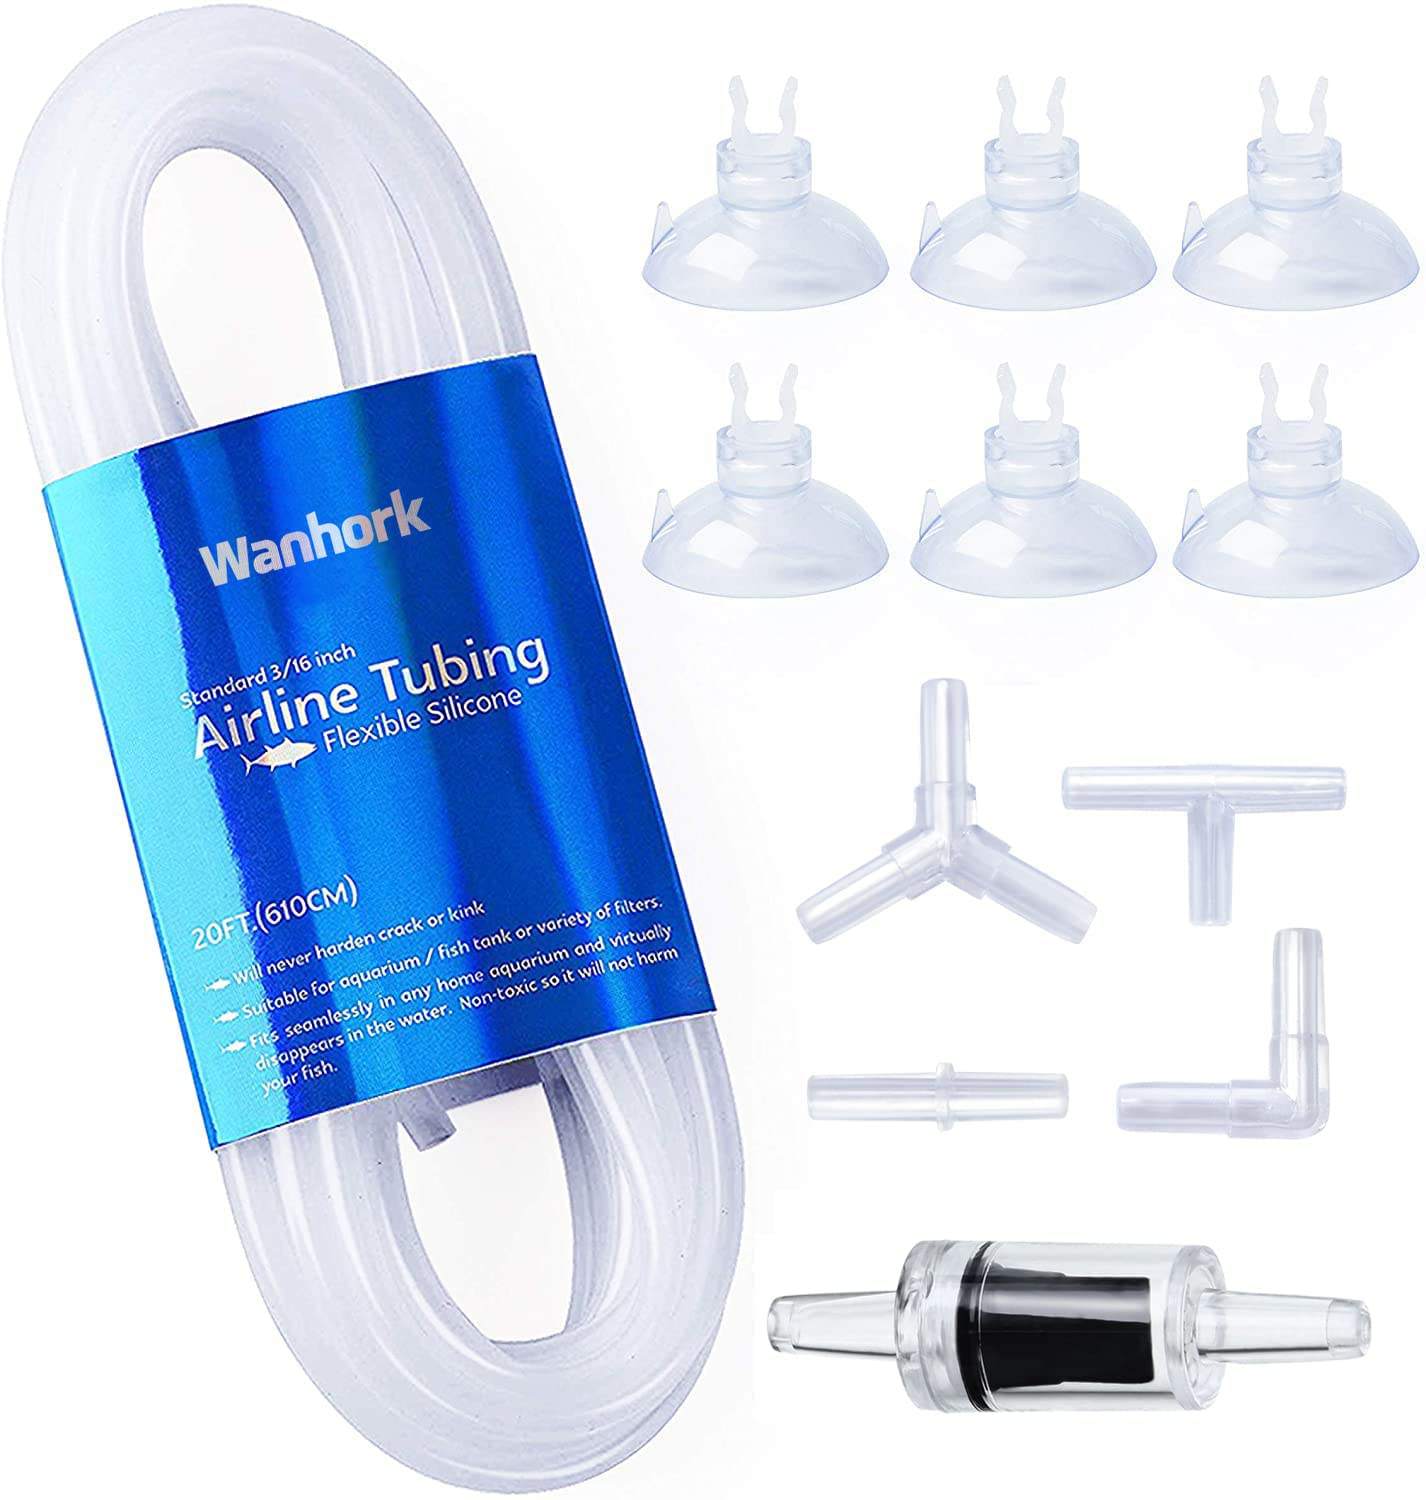 Wanhork 3/16" Professional Flexible Airline Tubing Standard Aquarium Air Pump Accessories with Check Valves, Suction Cups and Connectors, 20 Feet Animals & Pet Supplies > Pet Supplies > Fish Supplies > Aquarium & Pond Tubing Wanhork Clear-01  